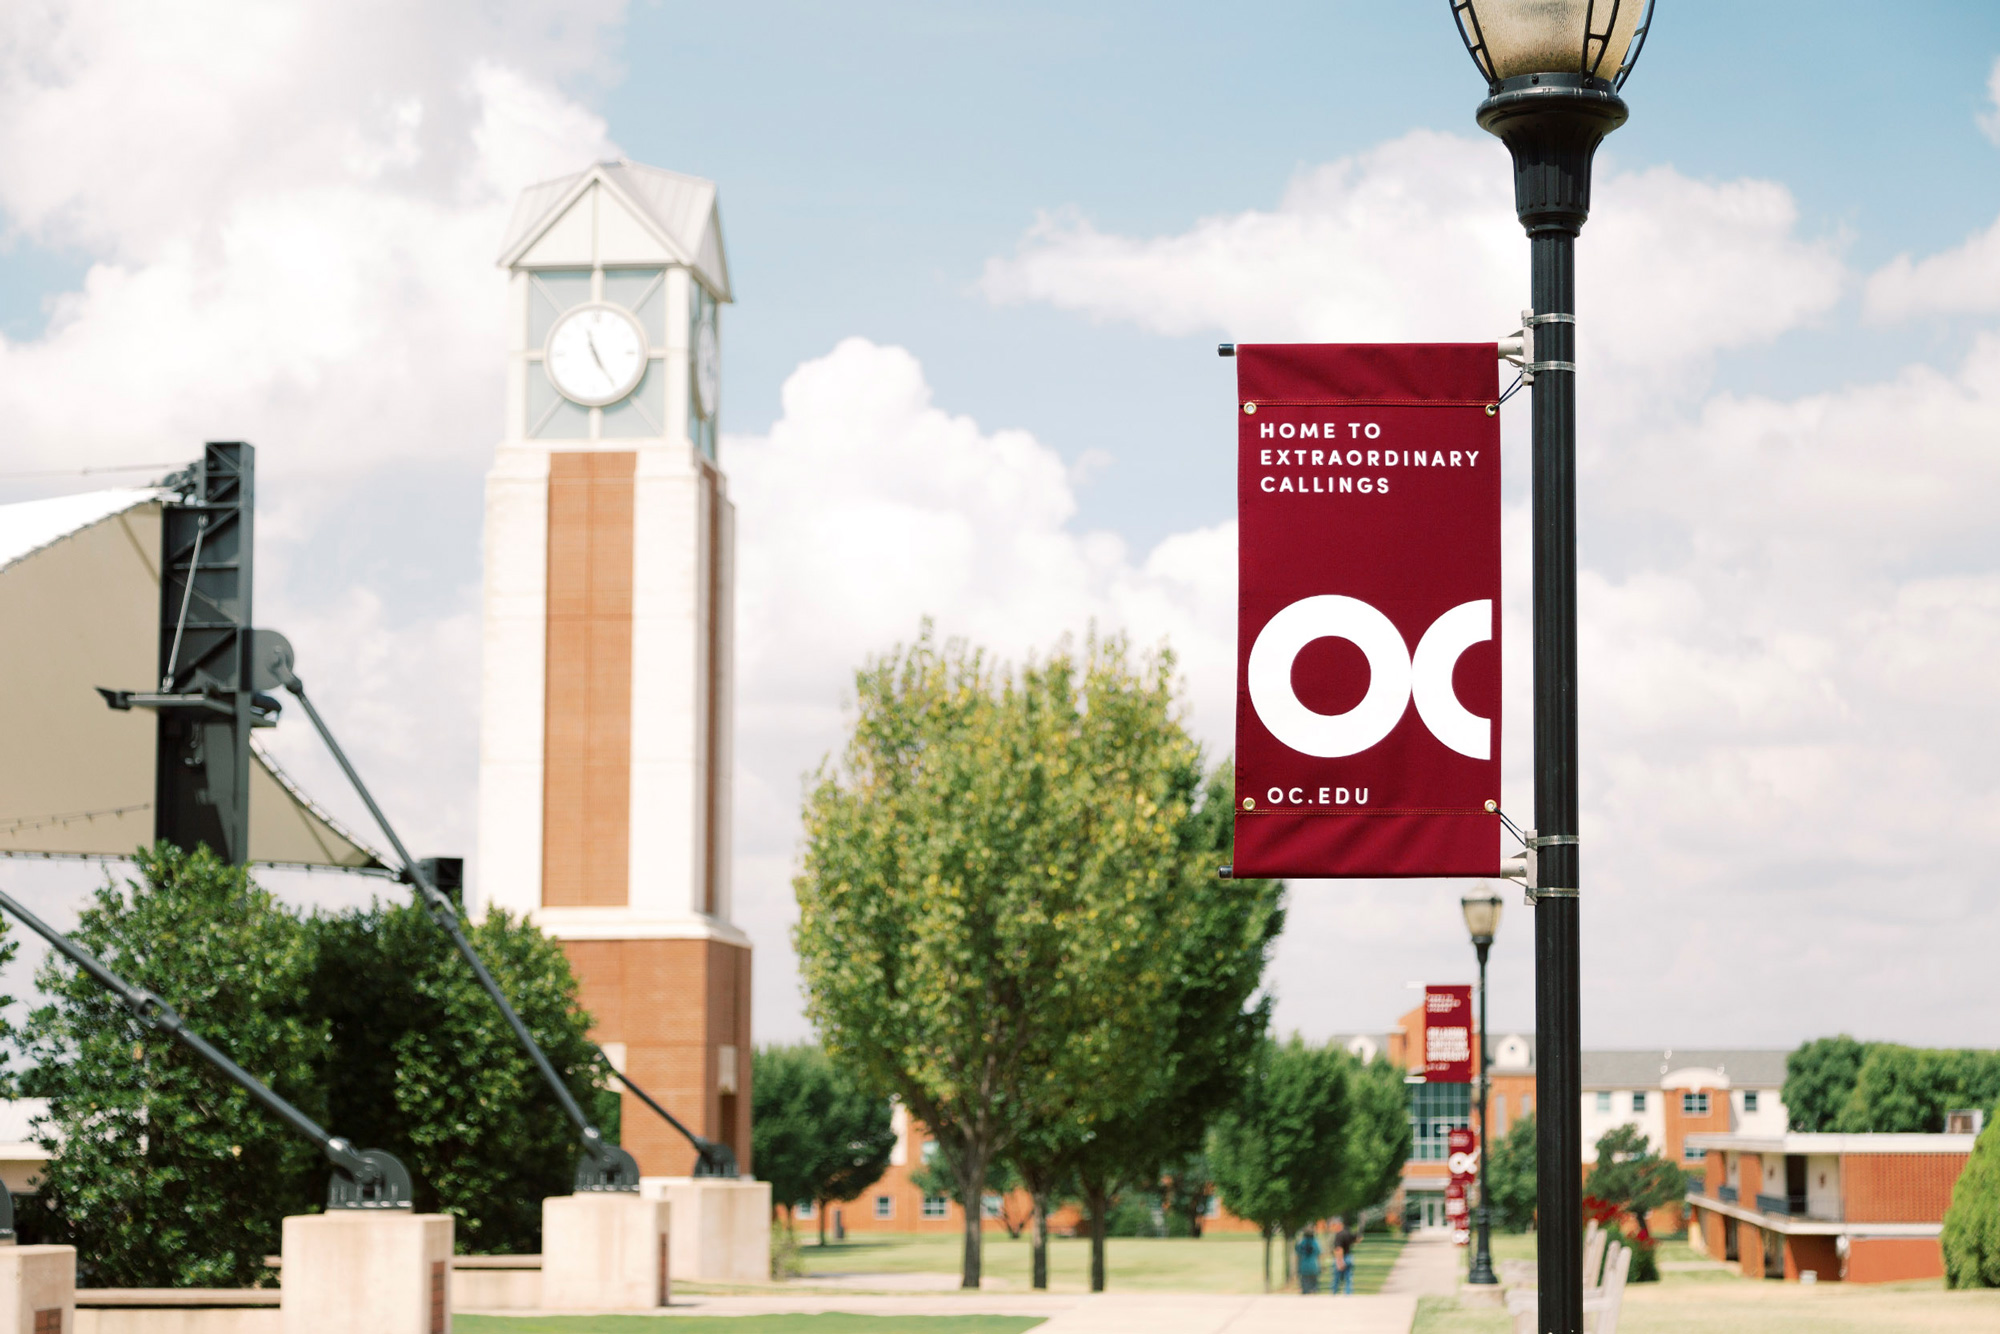 New Logo and Identity for Oklahoma Christian University by Switch